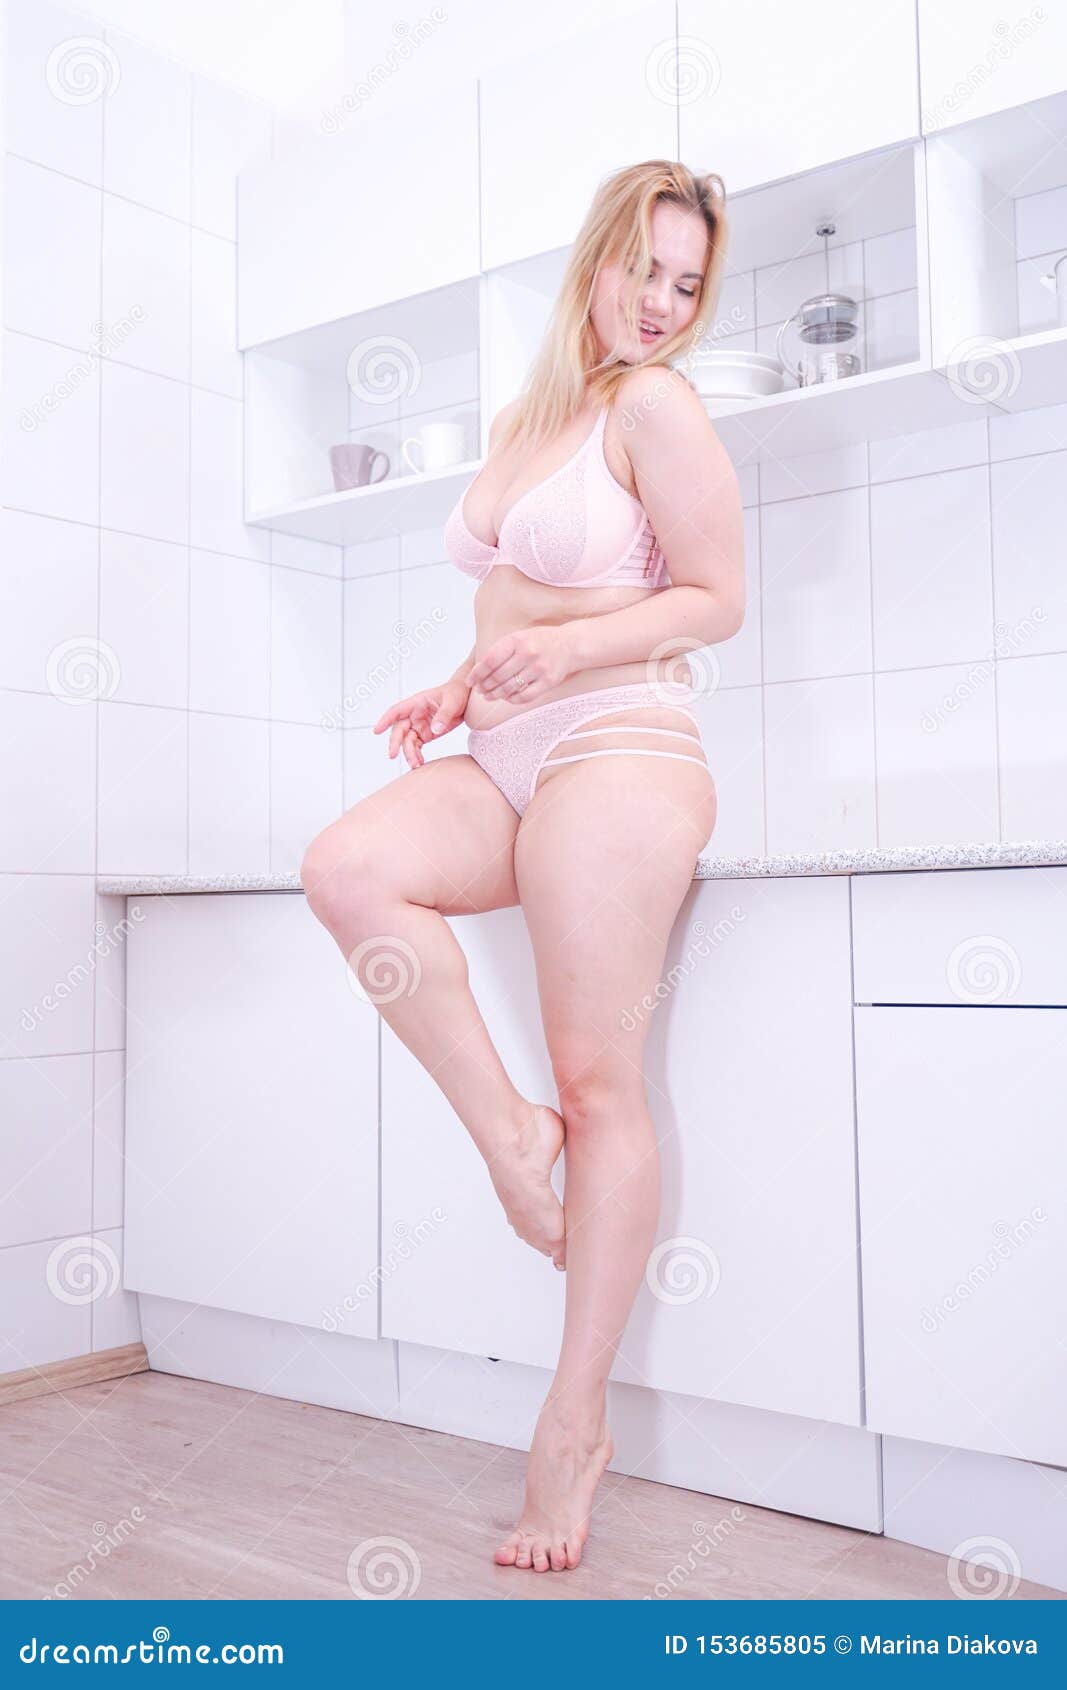 Beauty Blonde Caucasian Girl with Chubby Body in Pink Lingerie on White  Kitchen at Home Stock Image - Image of overweight, body: 153685805